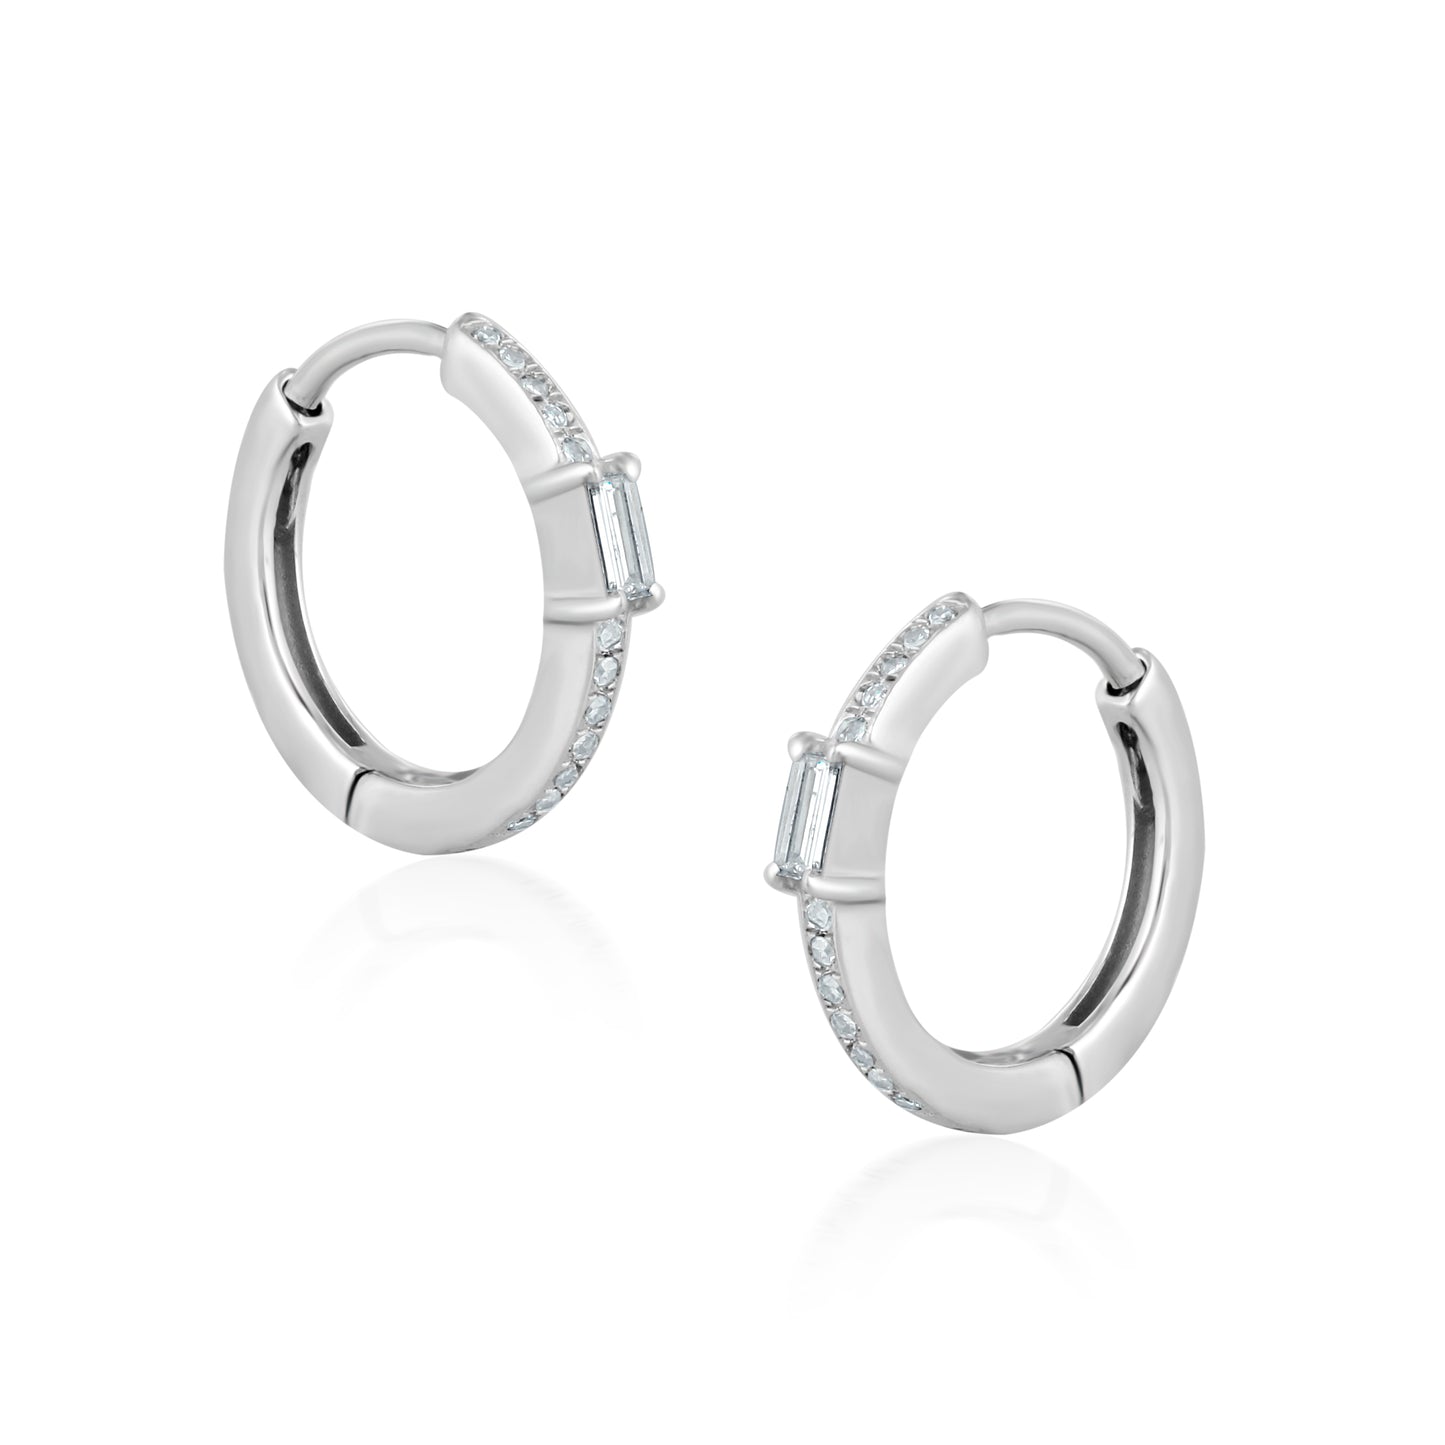 14K White Gold Hoop Earrings with Emerald Round Cut Diamonds